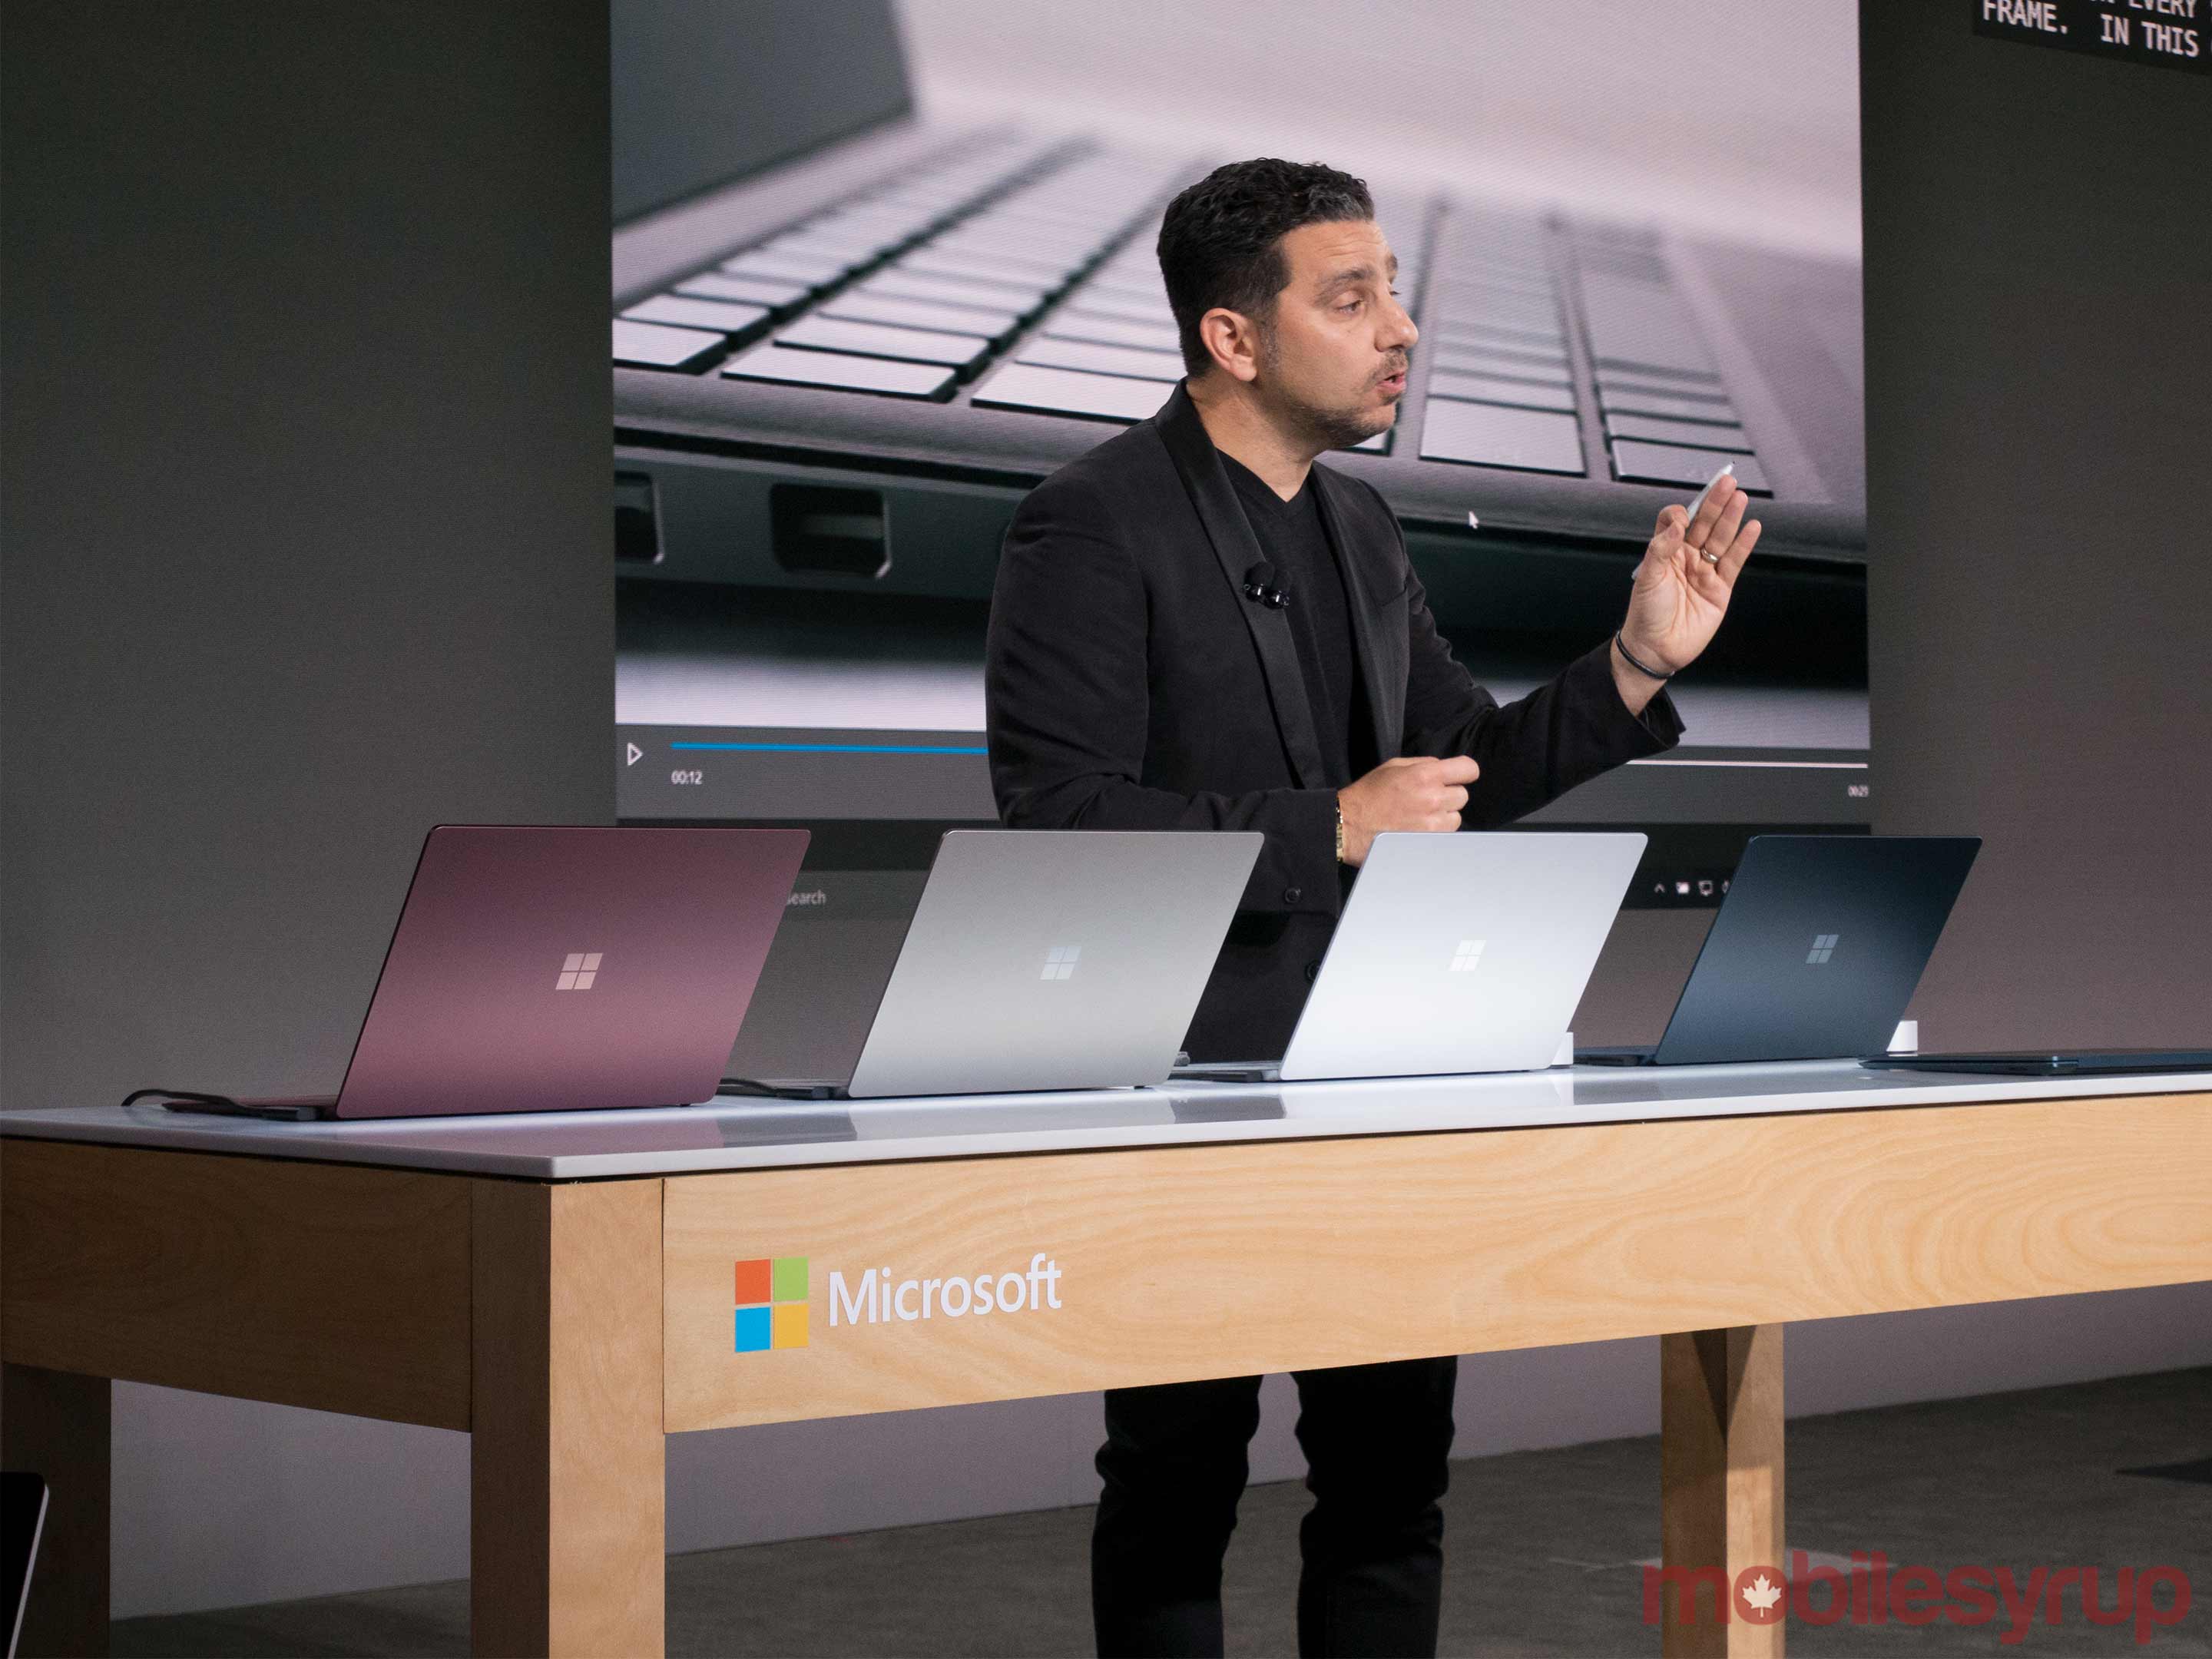 Microsoft's Surface Laptop is ridiculously expensive in the UK